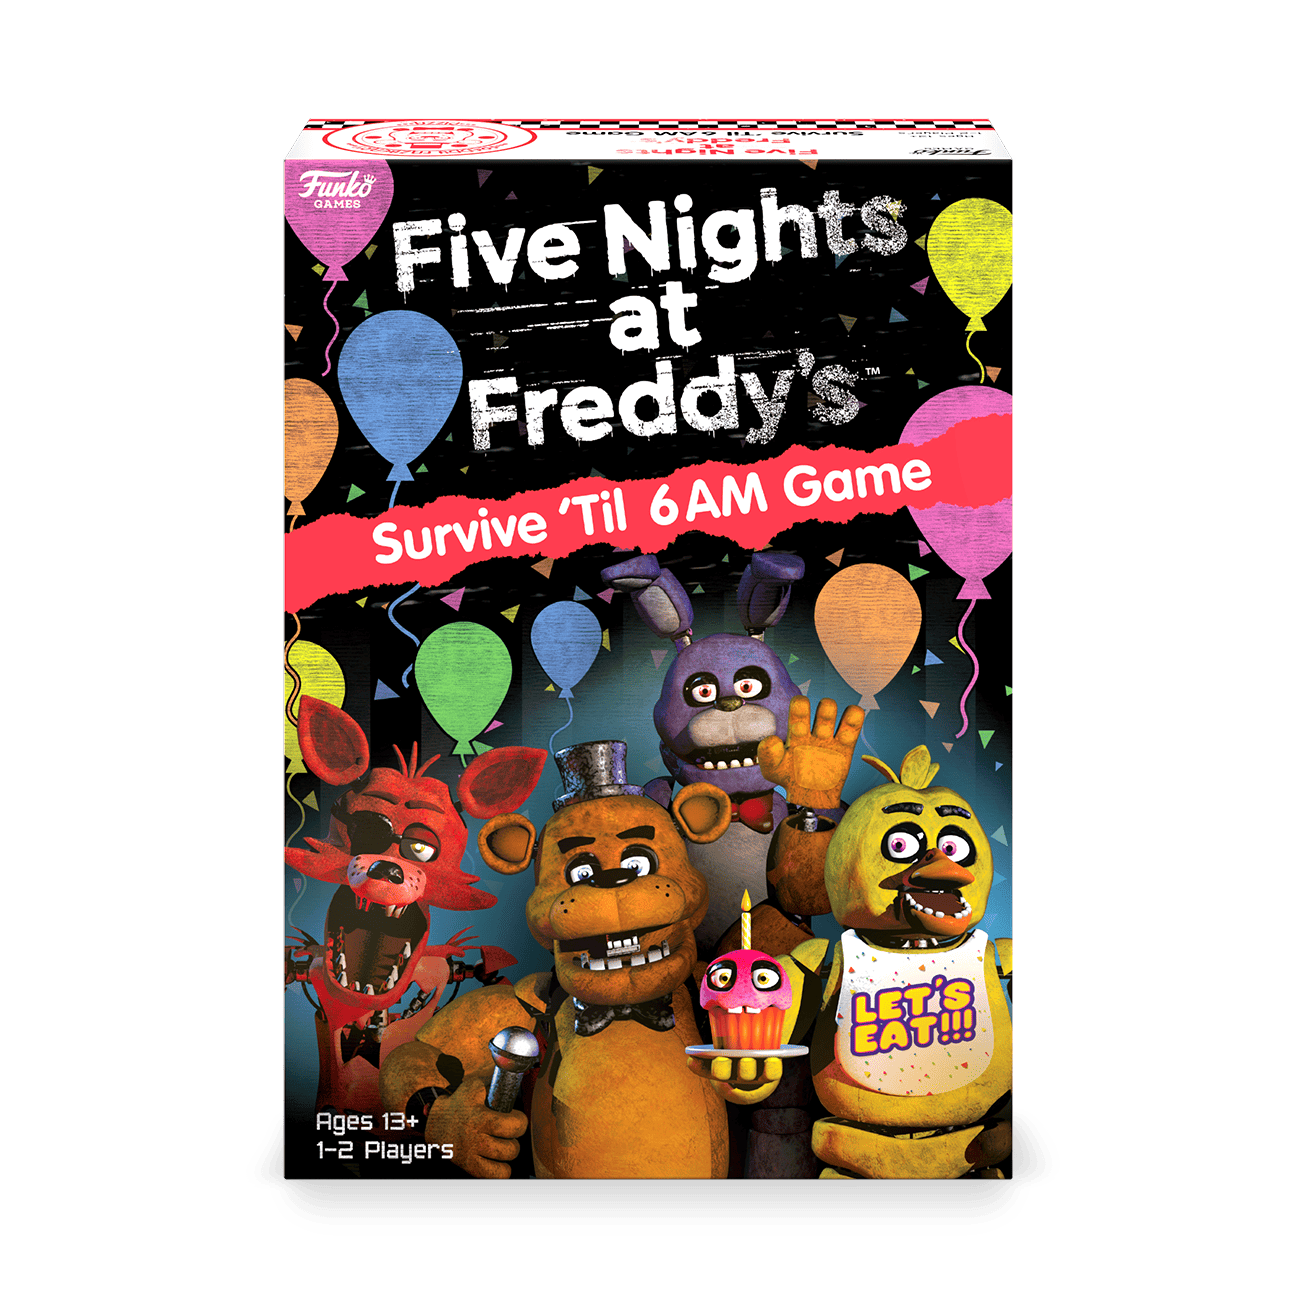 Buy Five Nights at Freddy's Survive 'Til 6AM Game at Funko.